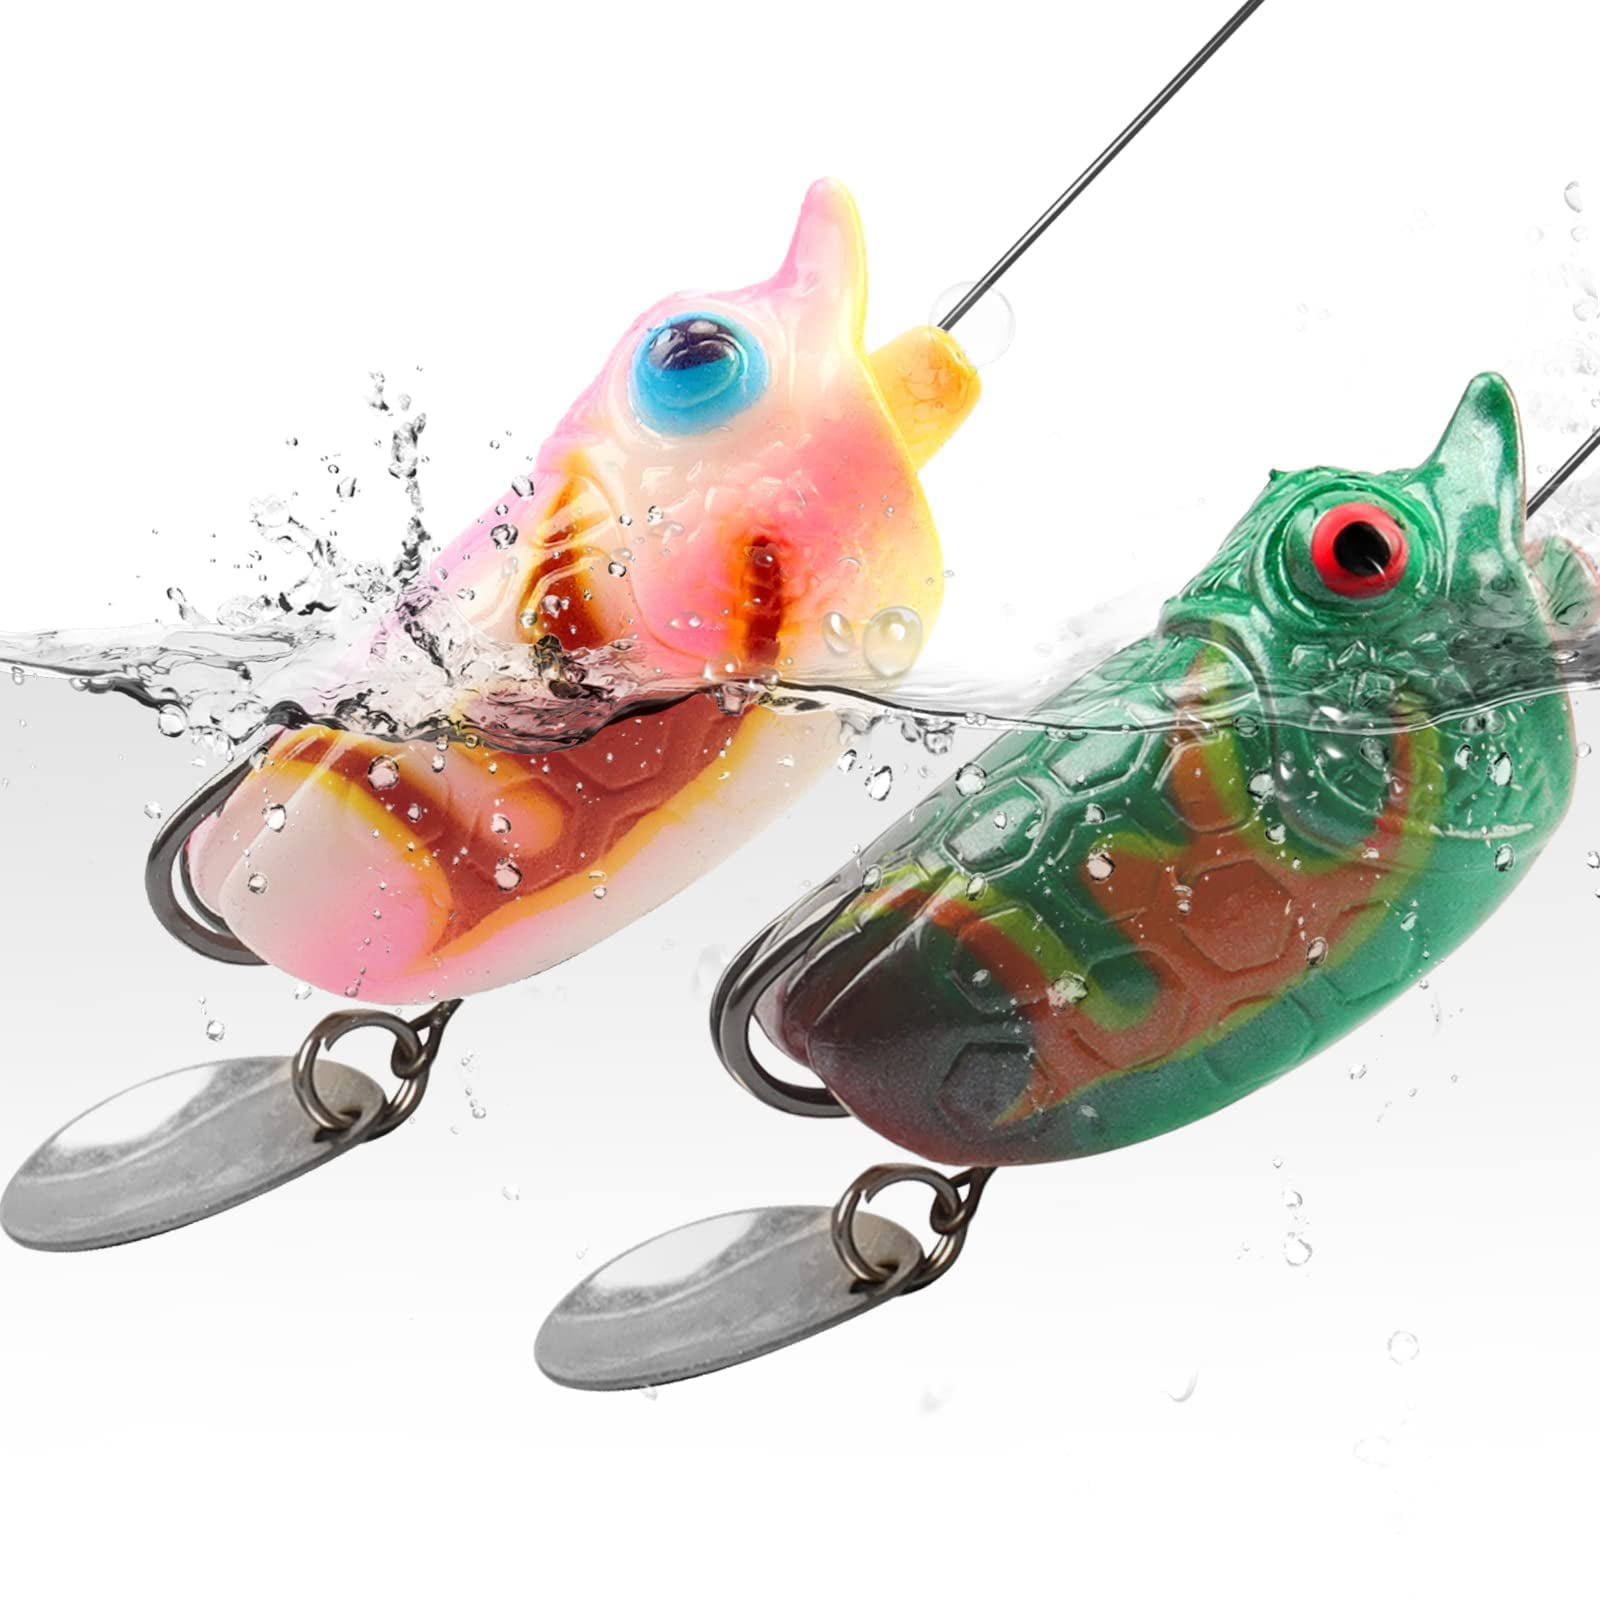 Topwater Lures - Soft Frog Fishing Lures with Sequins for Bass, Pike